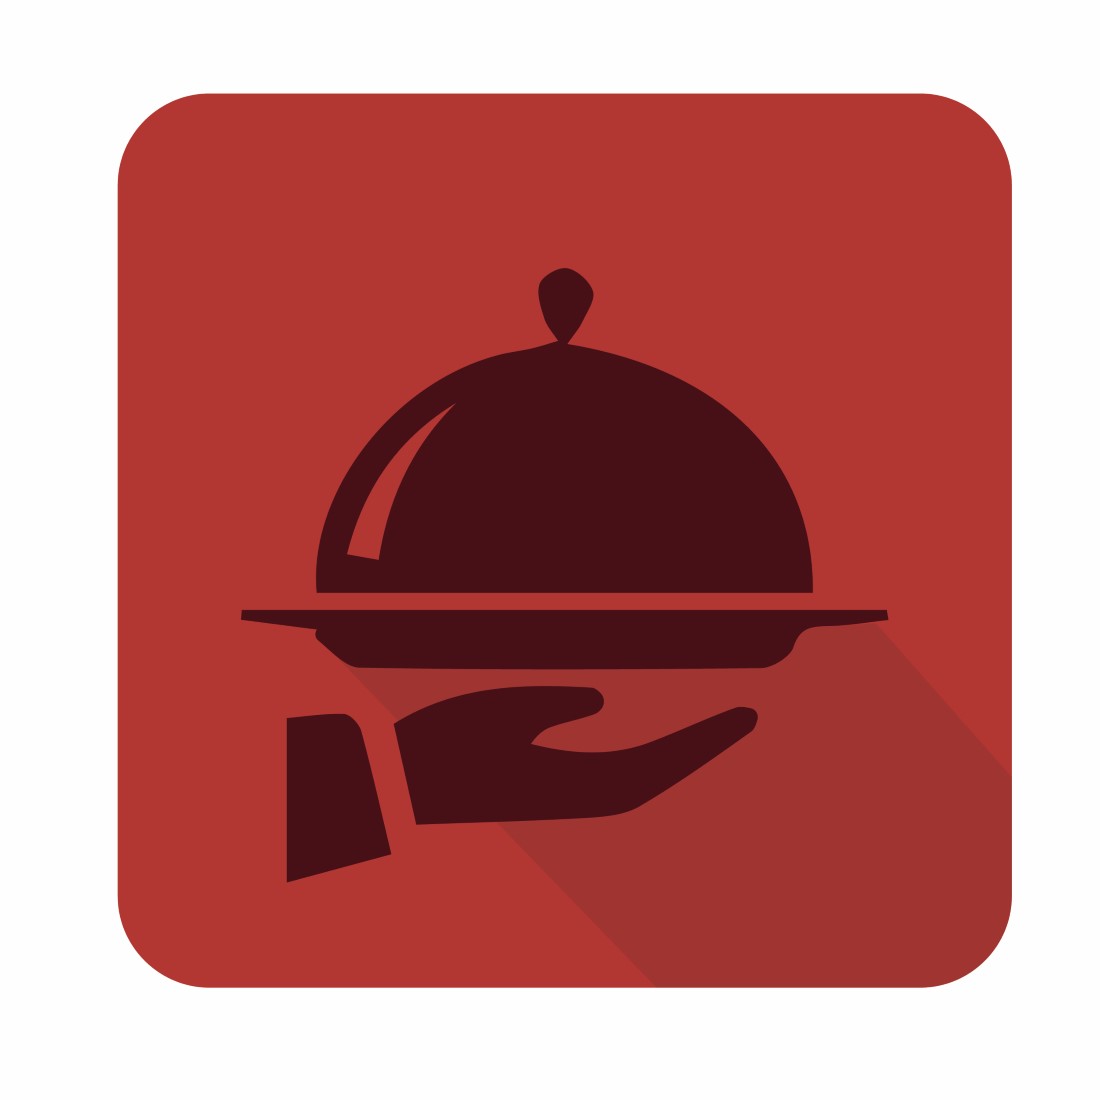 Food Catering Icon Design cover image.